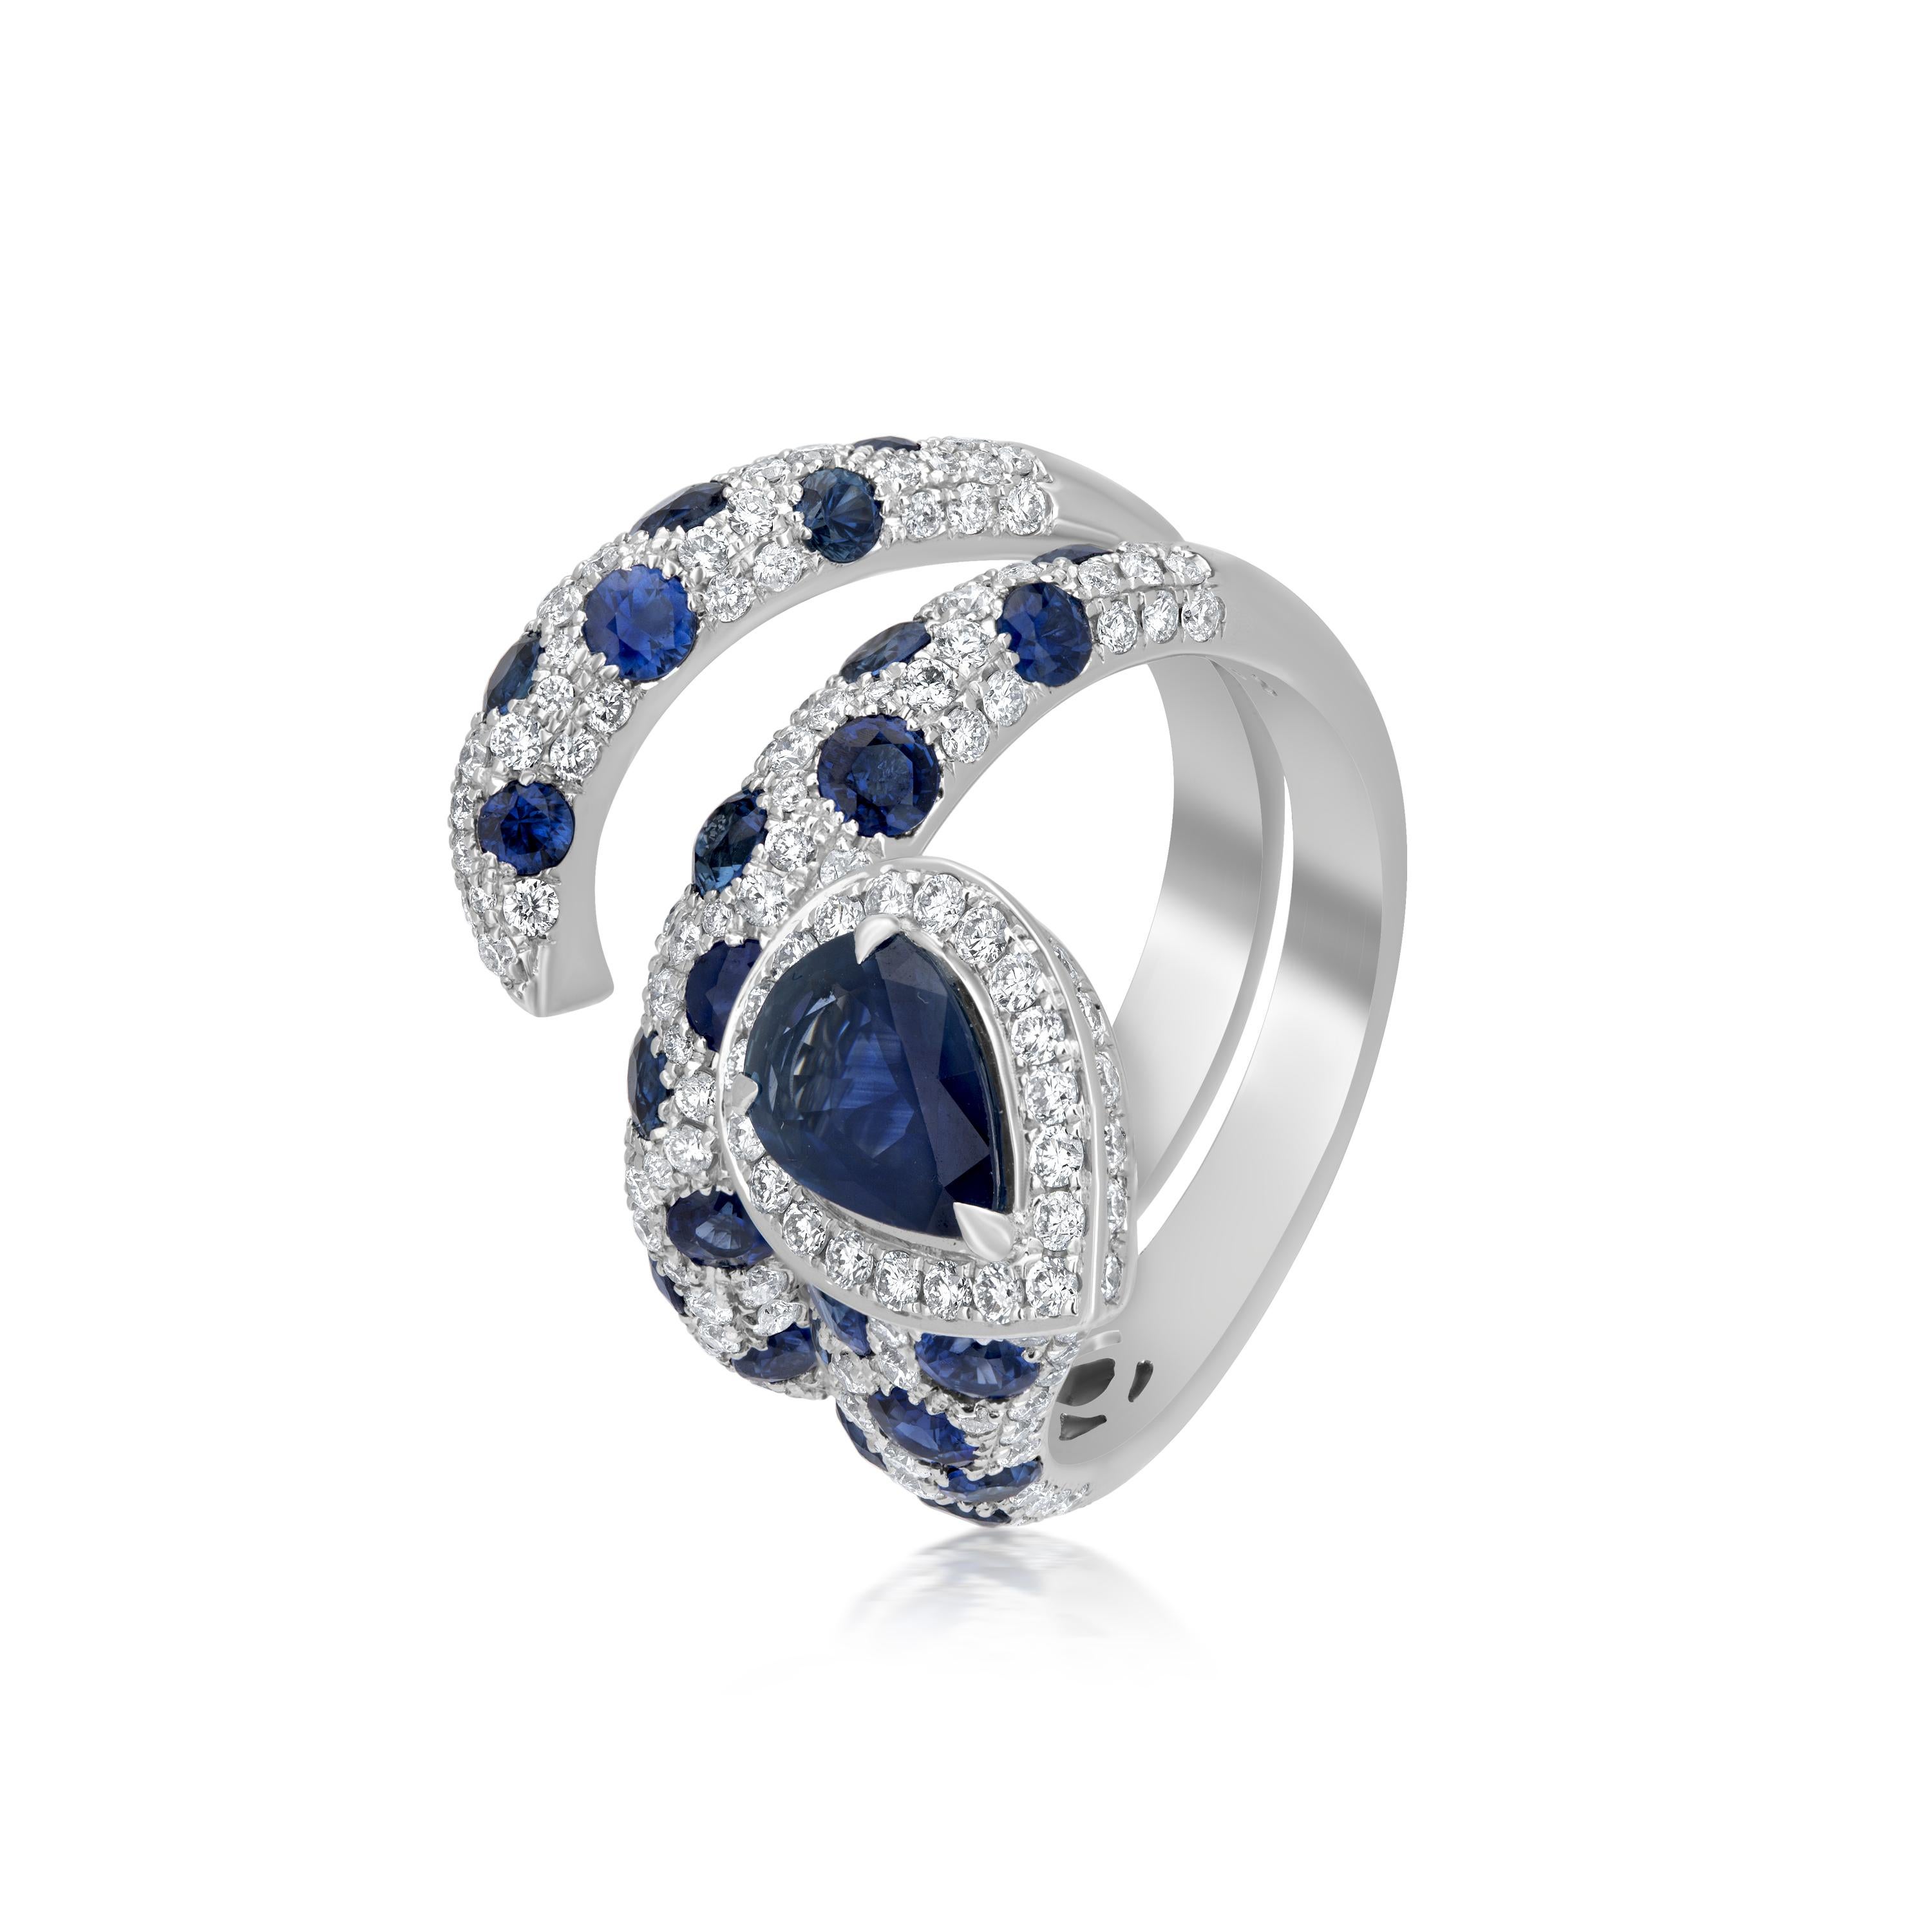 Twirl with this swirl ring in a gorgeous saree on your engagement day. Crafted by Nigaam on an 18K White Gold body, this ring has round full-cut diamonds and round-cut and pear-cut blue sapphires in a lovely pattern that is unmatched, and rare to